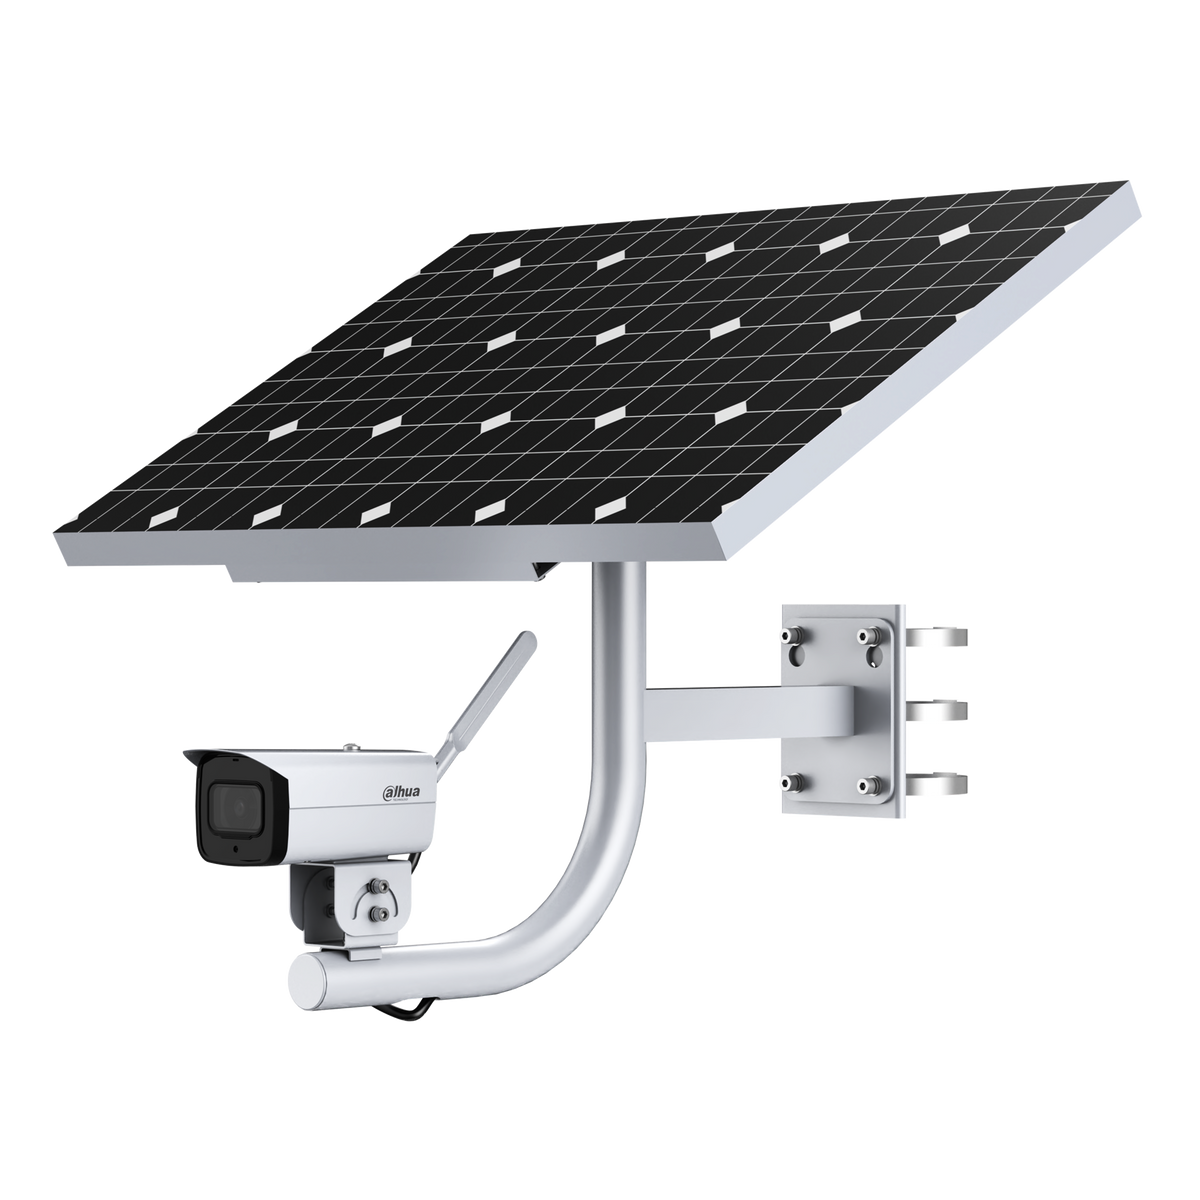 DAHUA KIT/DH-PFM378-B60-W/DH-IPC-HFW3241DF-AS-4G/DH-PFA150 Integrated Solar Monitoring System(Without Lithium Battery)